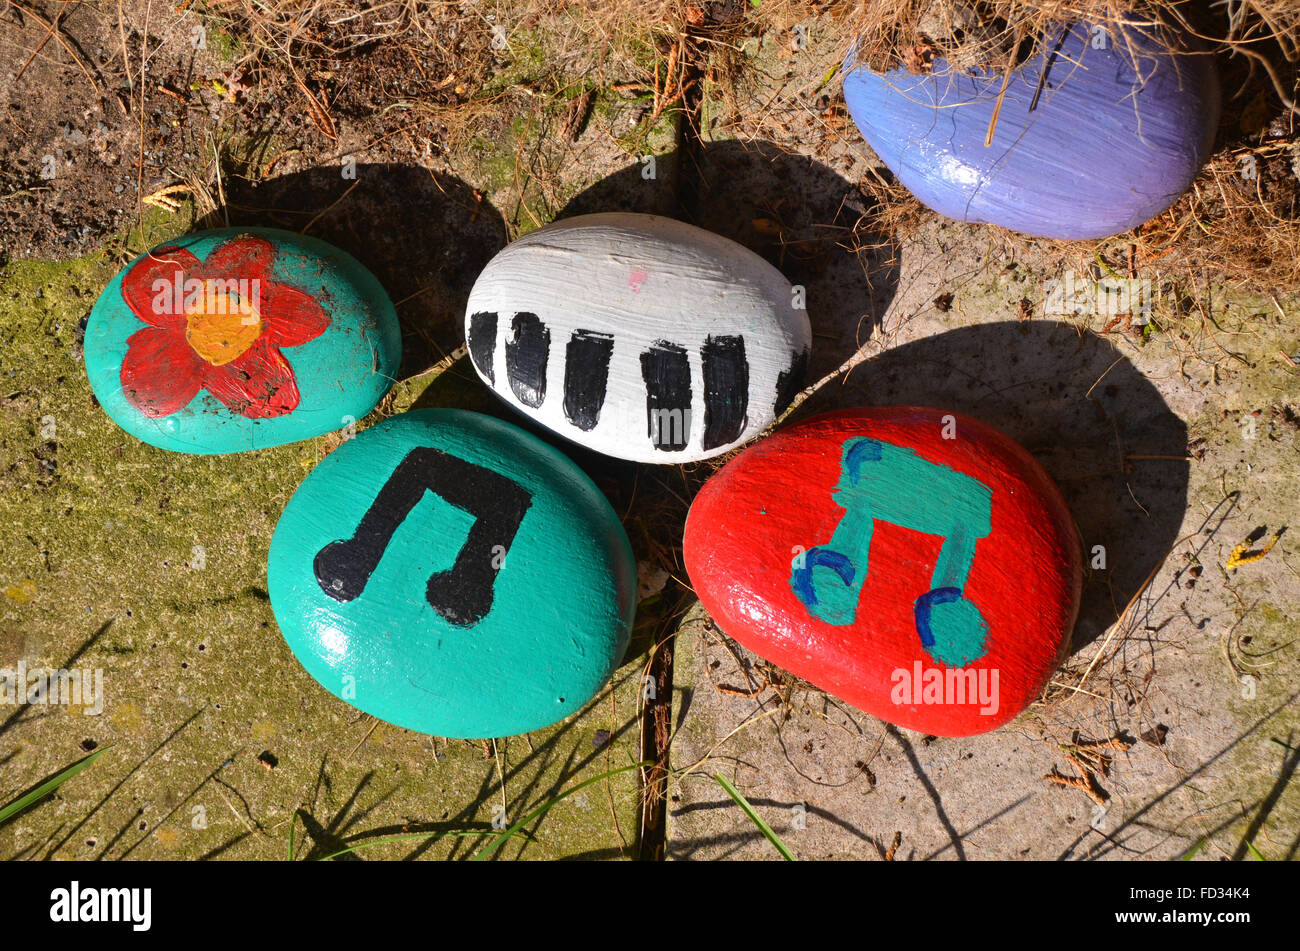 Colourful painted ornamental garden pebbles / rocks by children depicting flowers and musical notations Stock Photo